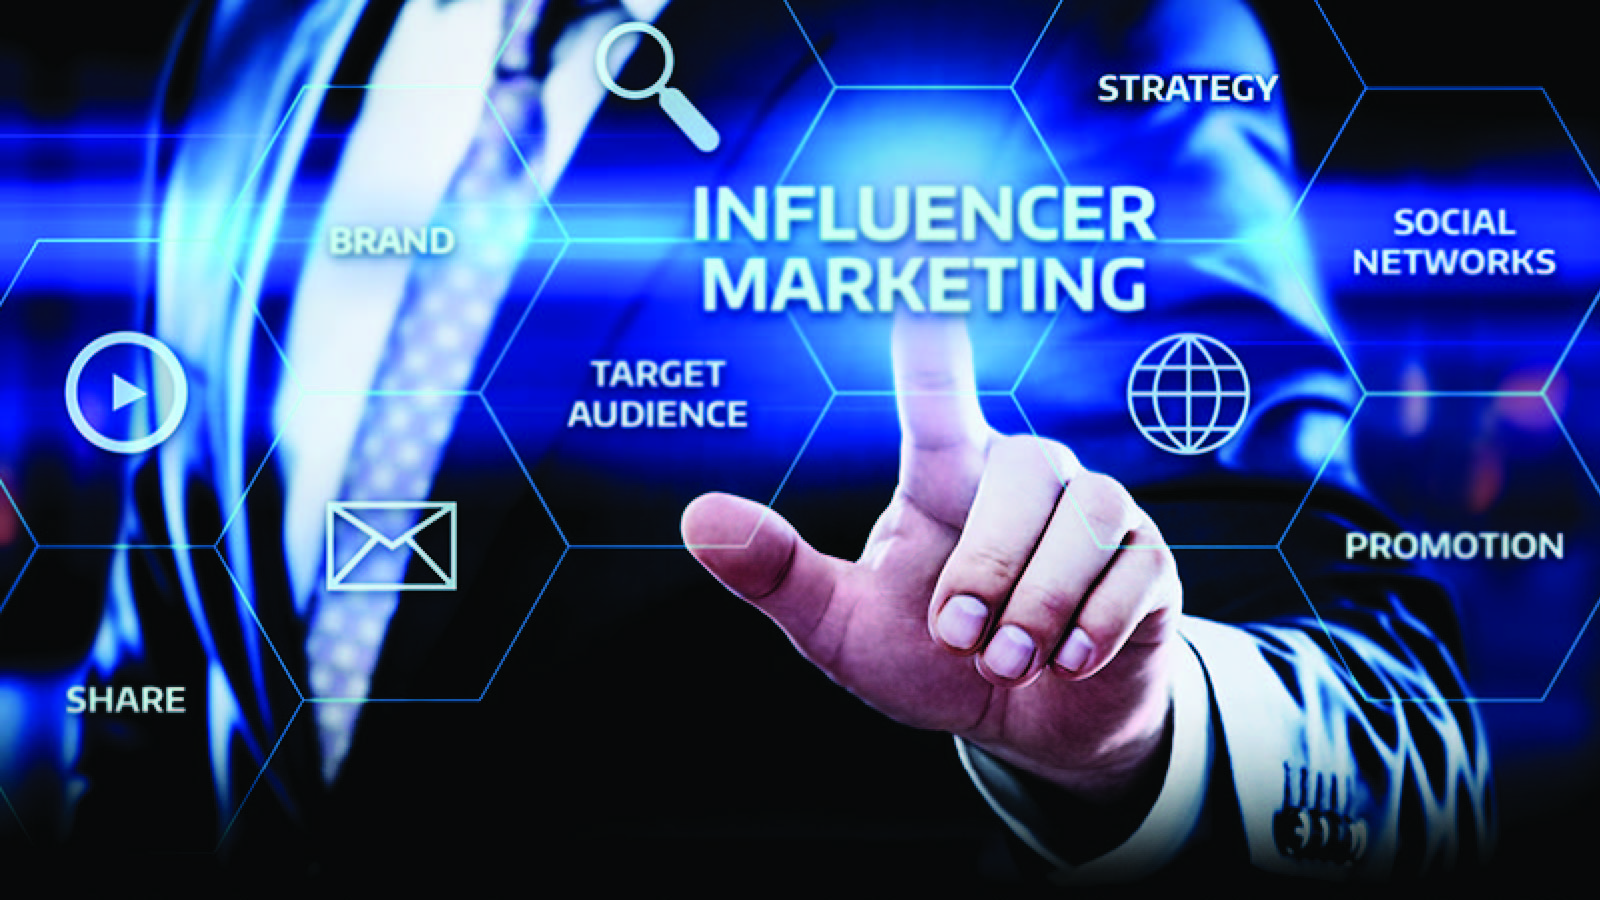 Influencer MarketingTrends to Watch Out For in 2020